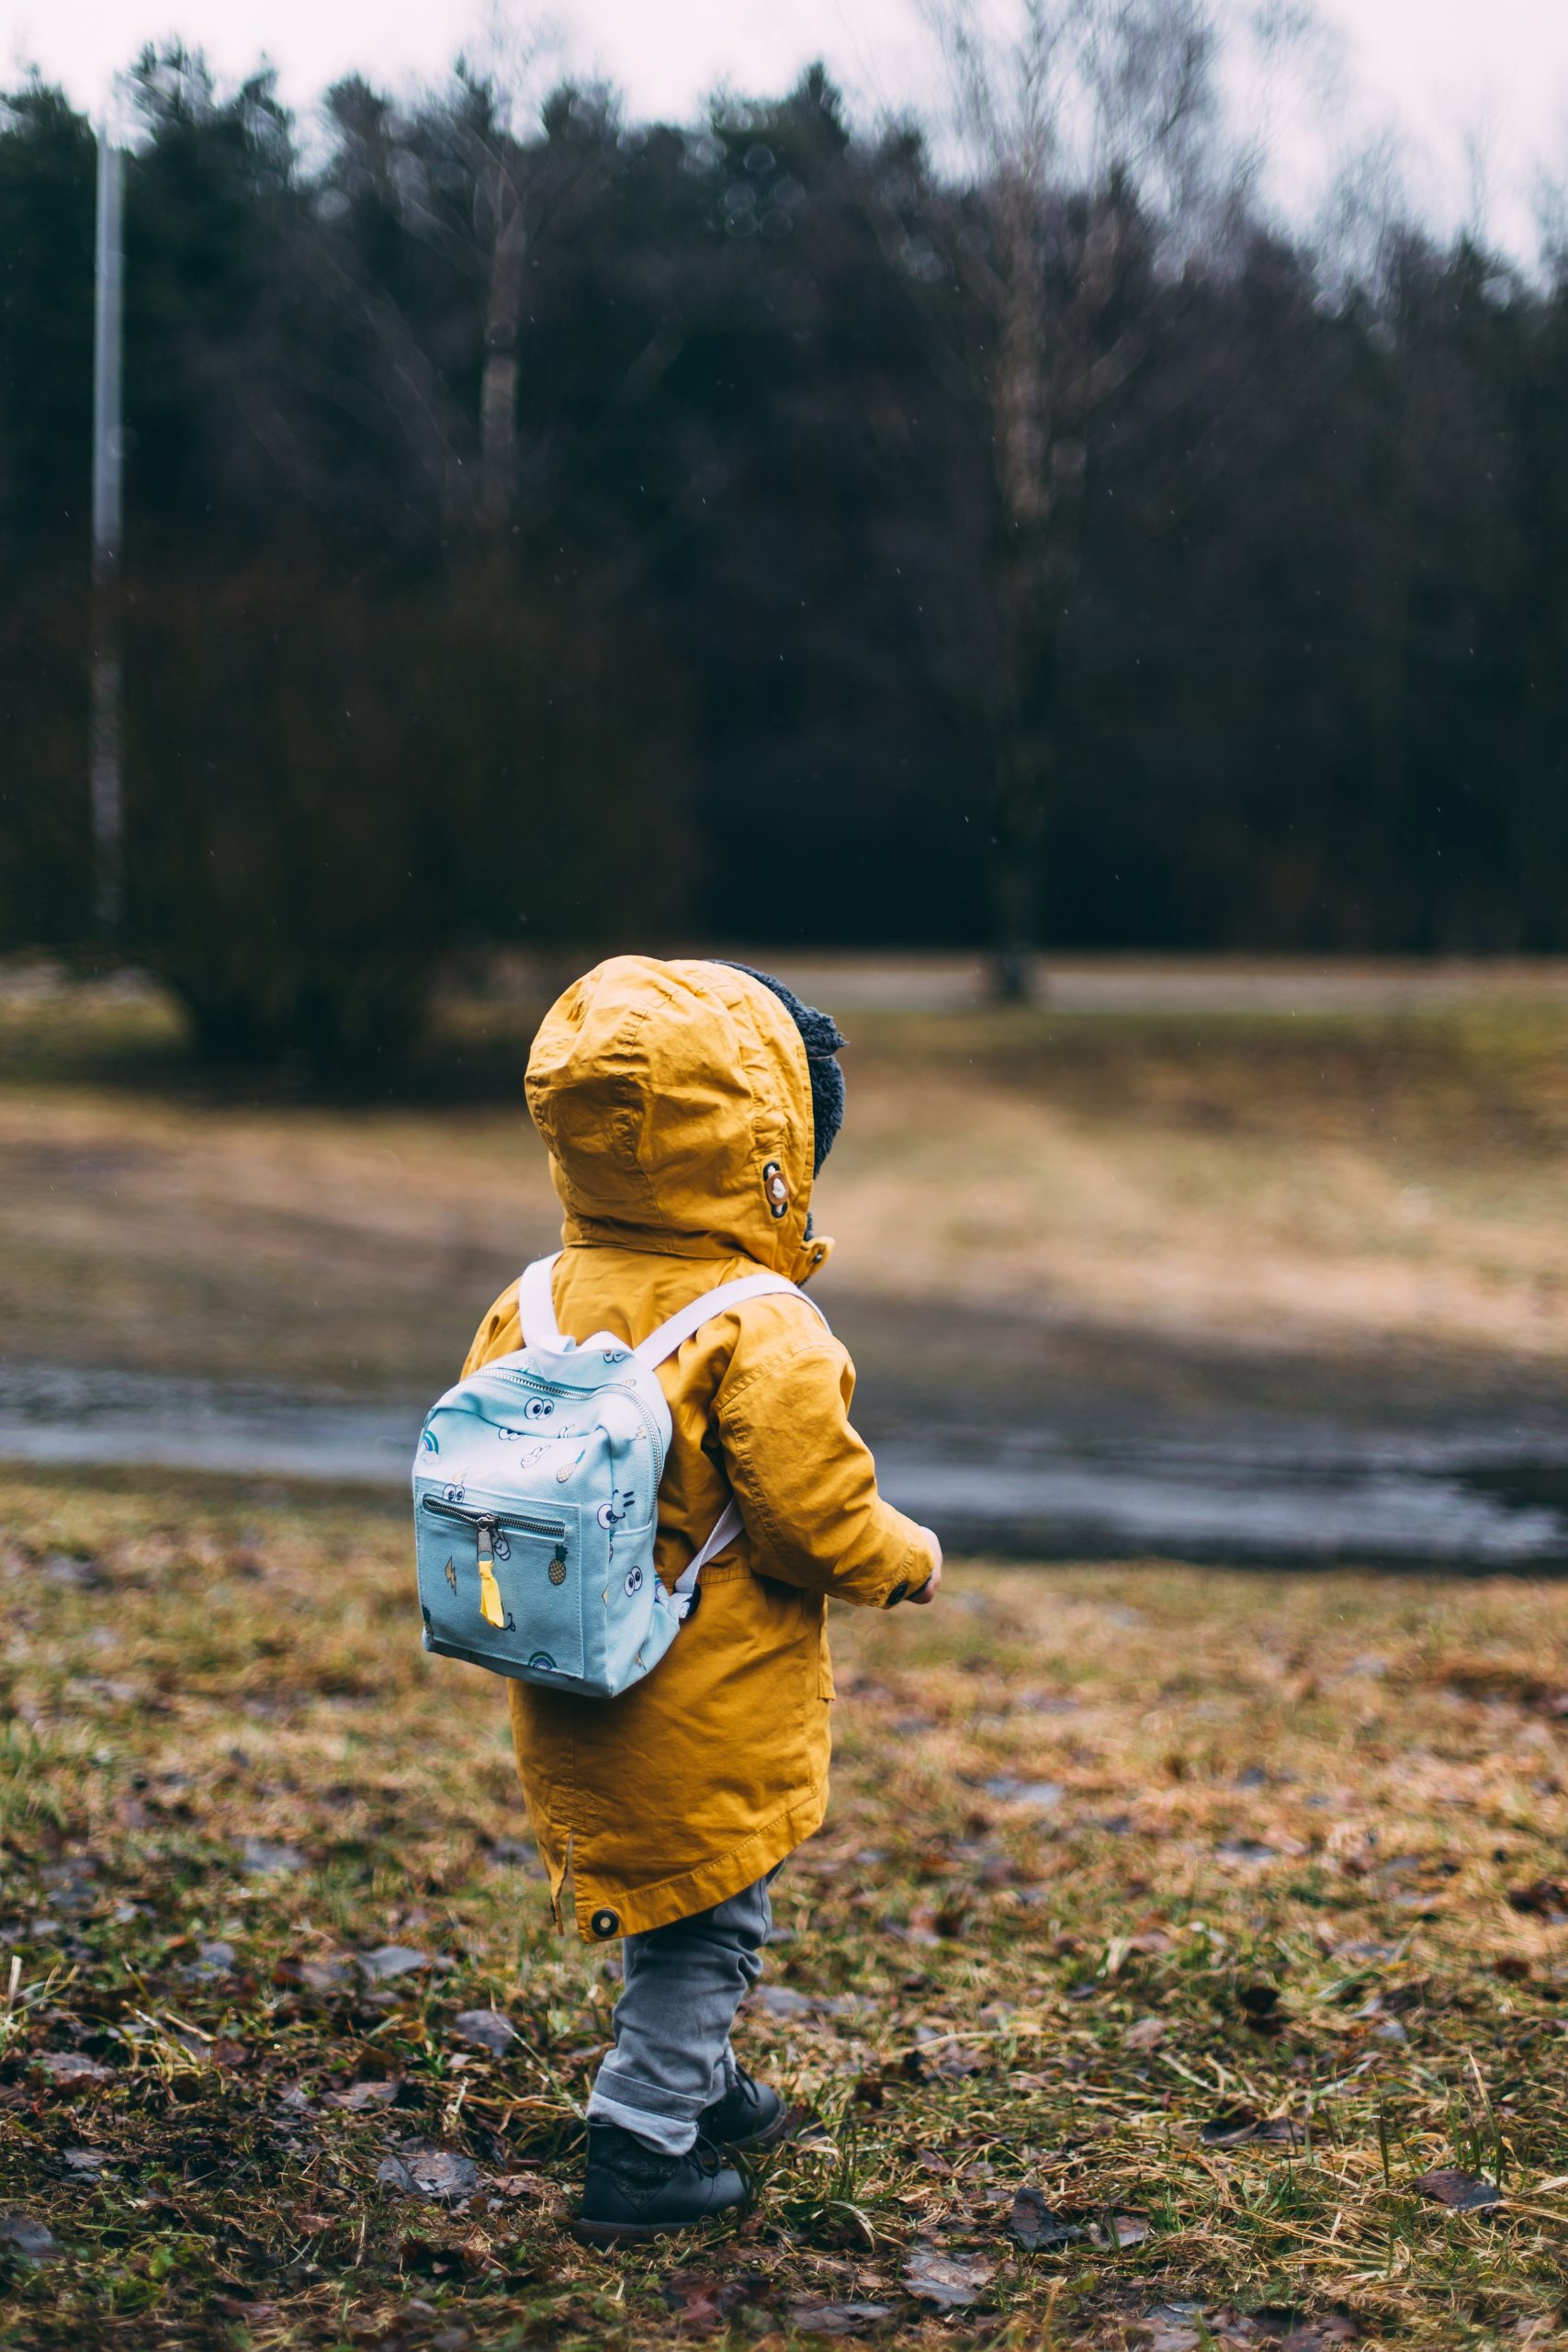 A young child walking away from the camera wearing an anorak and rucksack in the rain